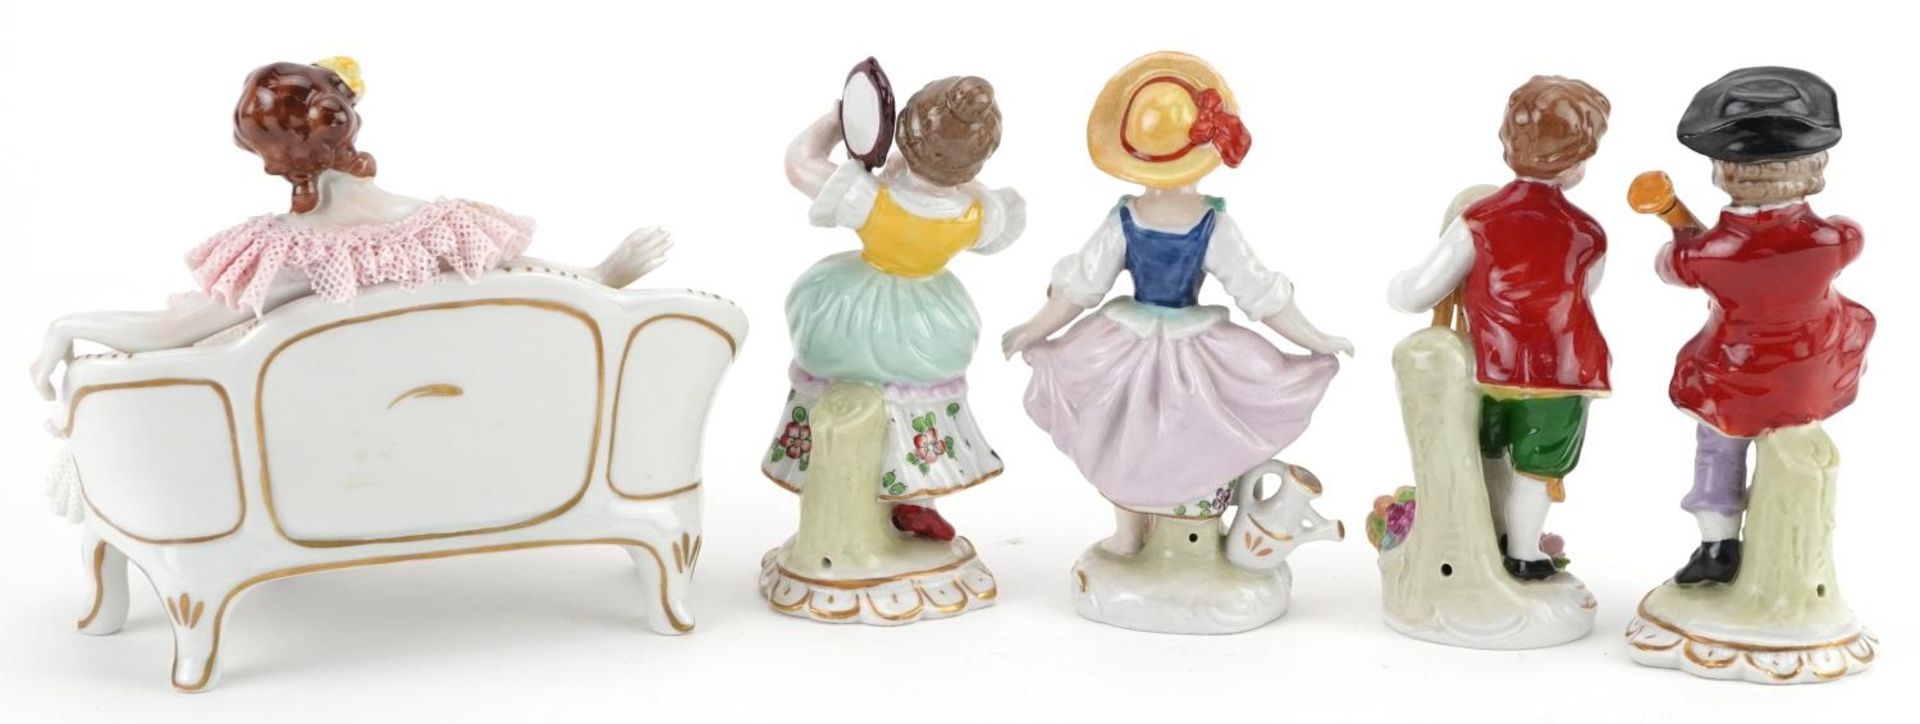 German porcelain comprising four Dresden figurines and a lace figurine in the form of a female on - Image 4 of 5